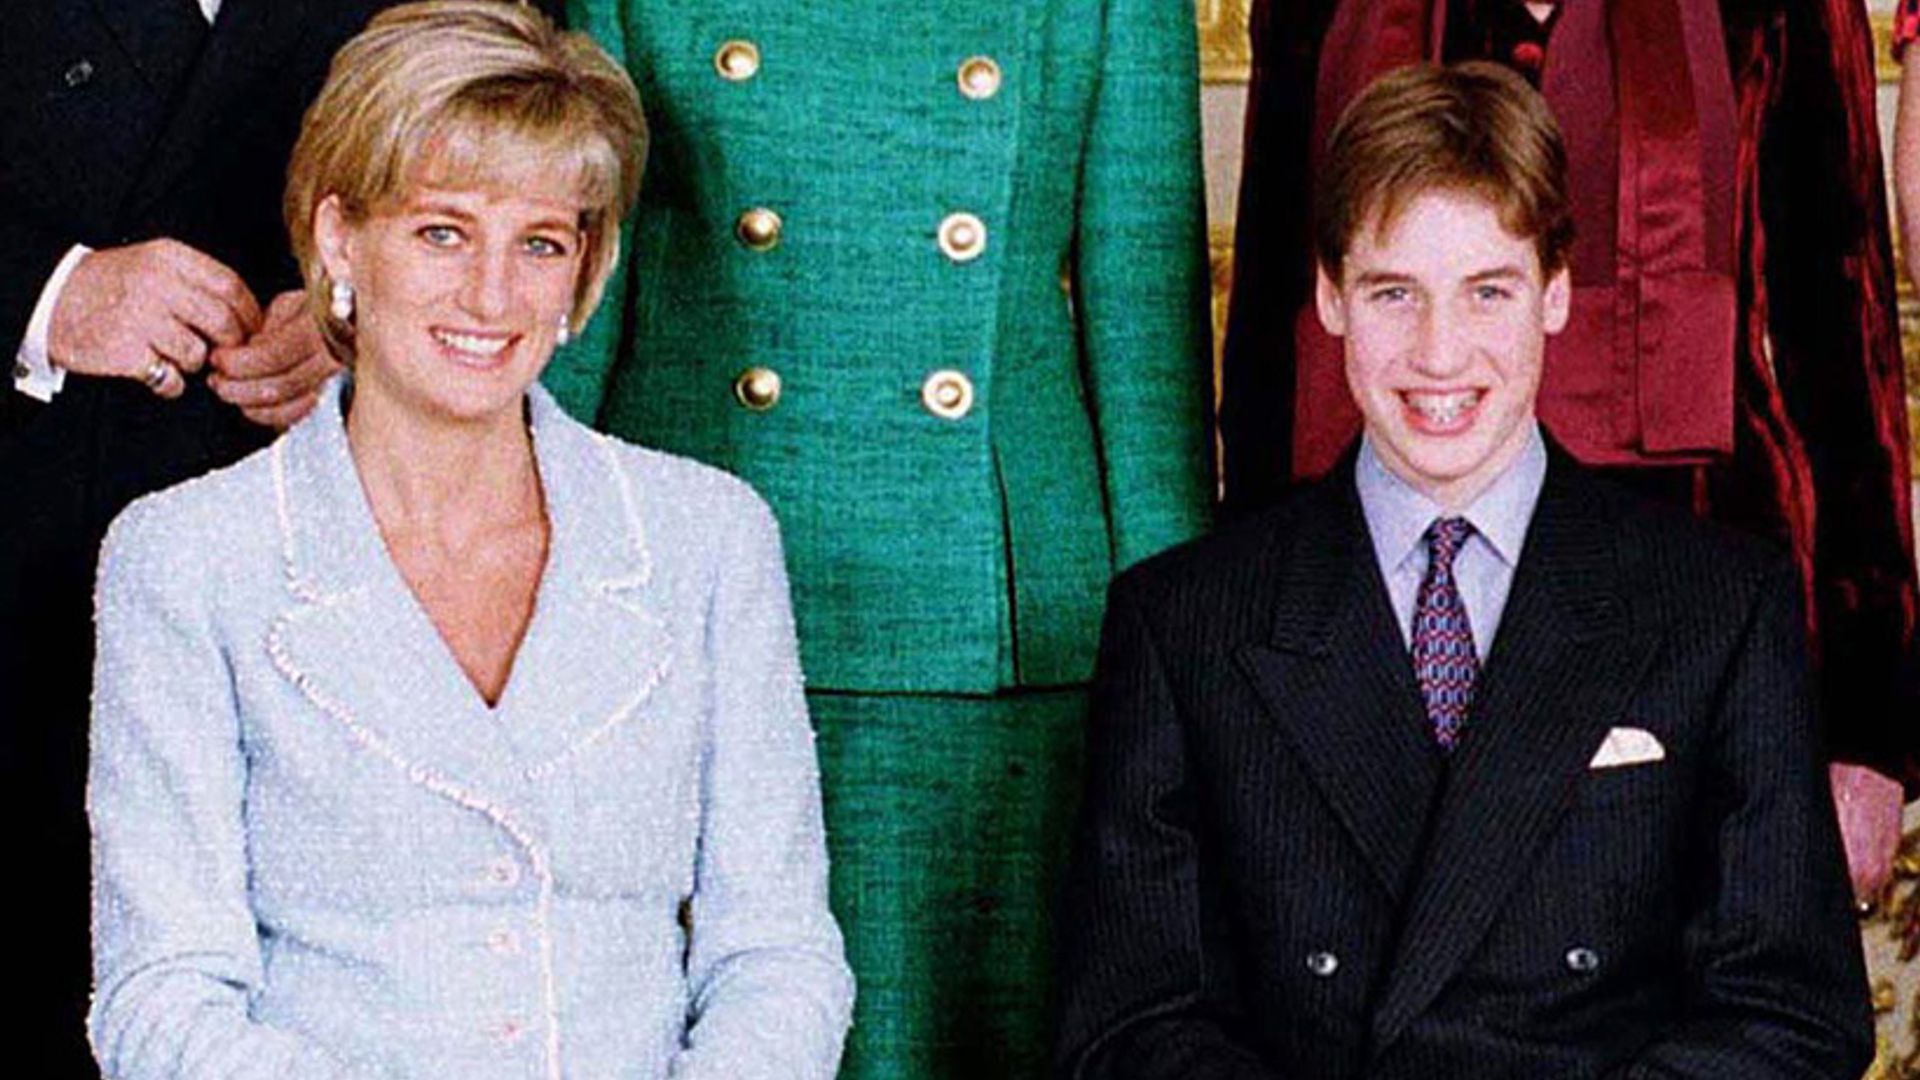 You'll never guess what saucy present Princess Diana gave Prince William on his 13th birthday